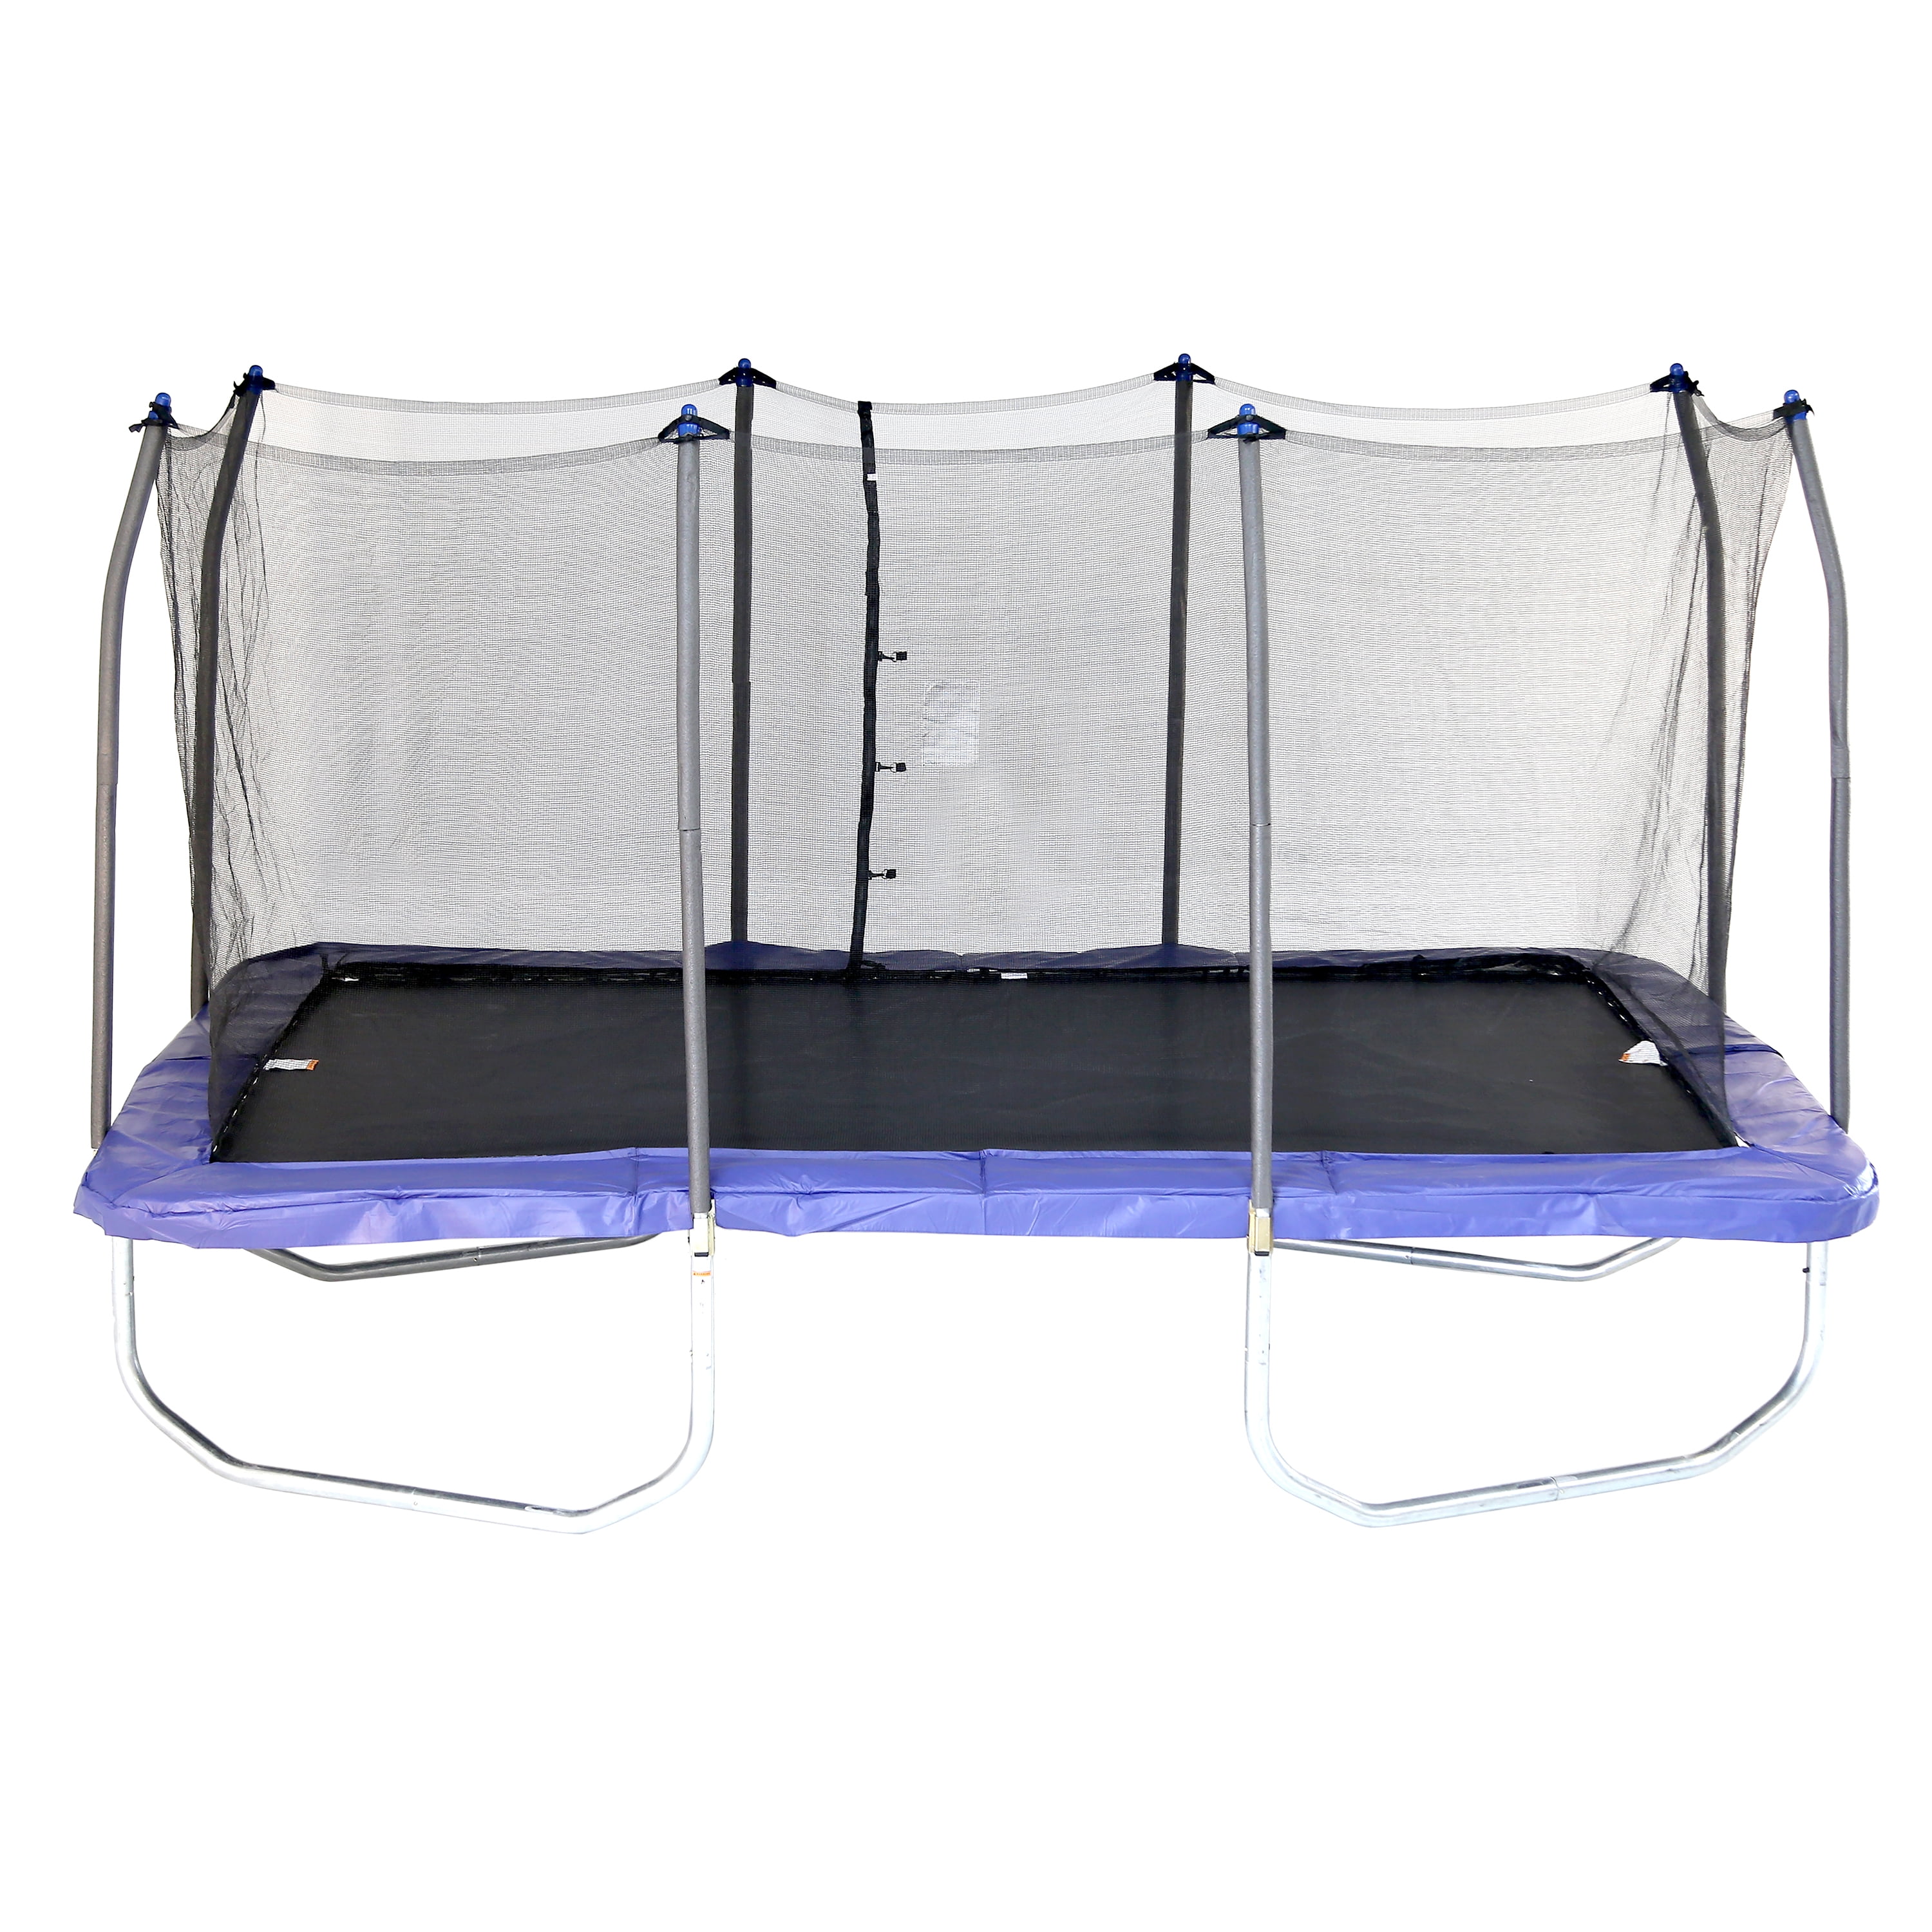 Skywalker Trampolines 15’ Round Jump N Dunk Trampoline with Enclosure and Basketball Hoop Gray & Light Blue